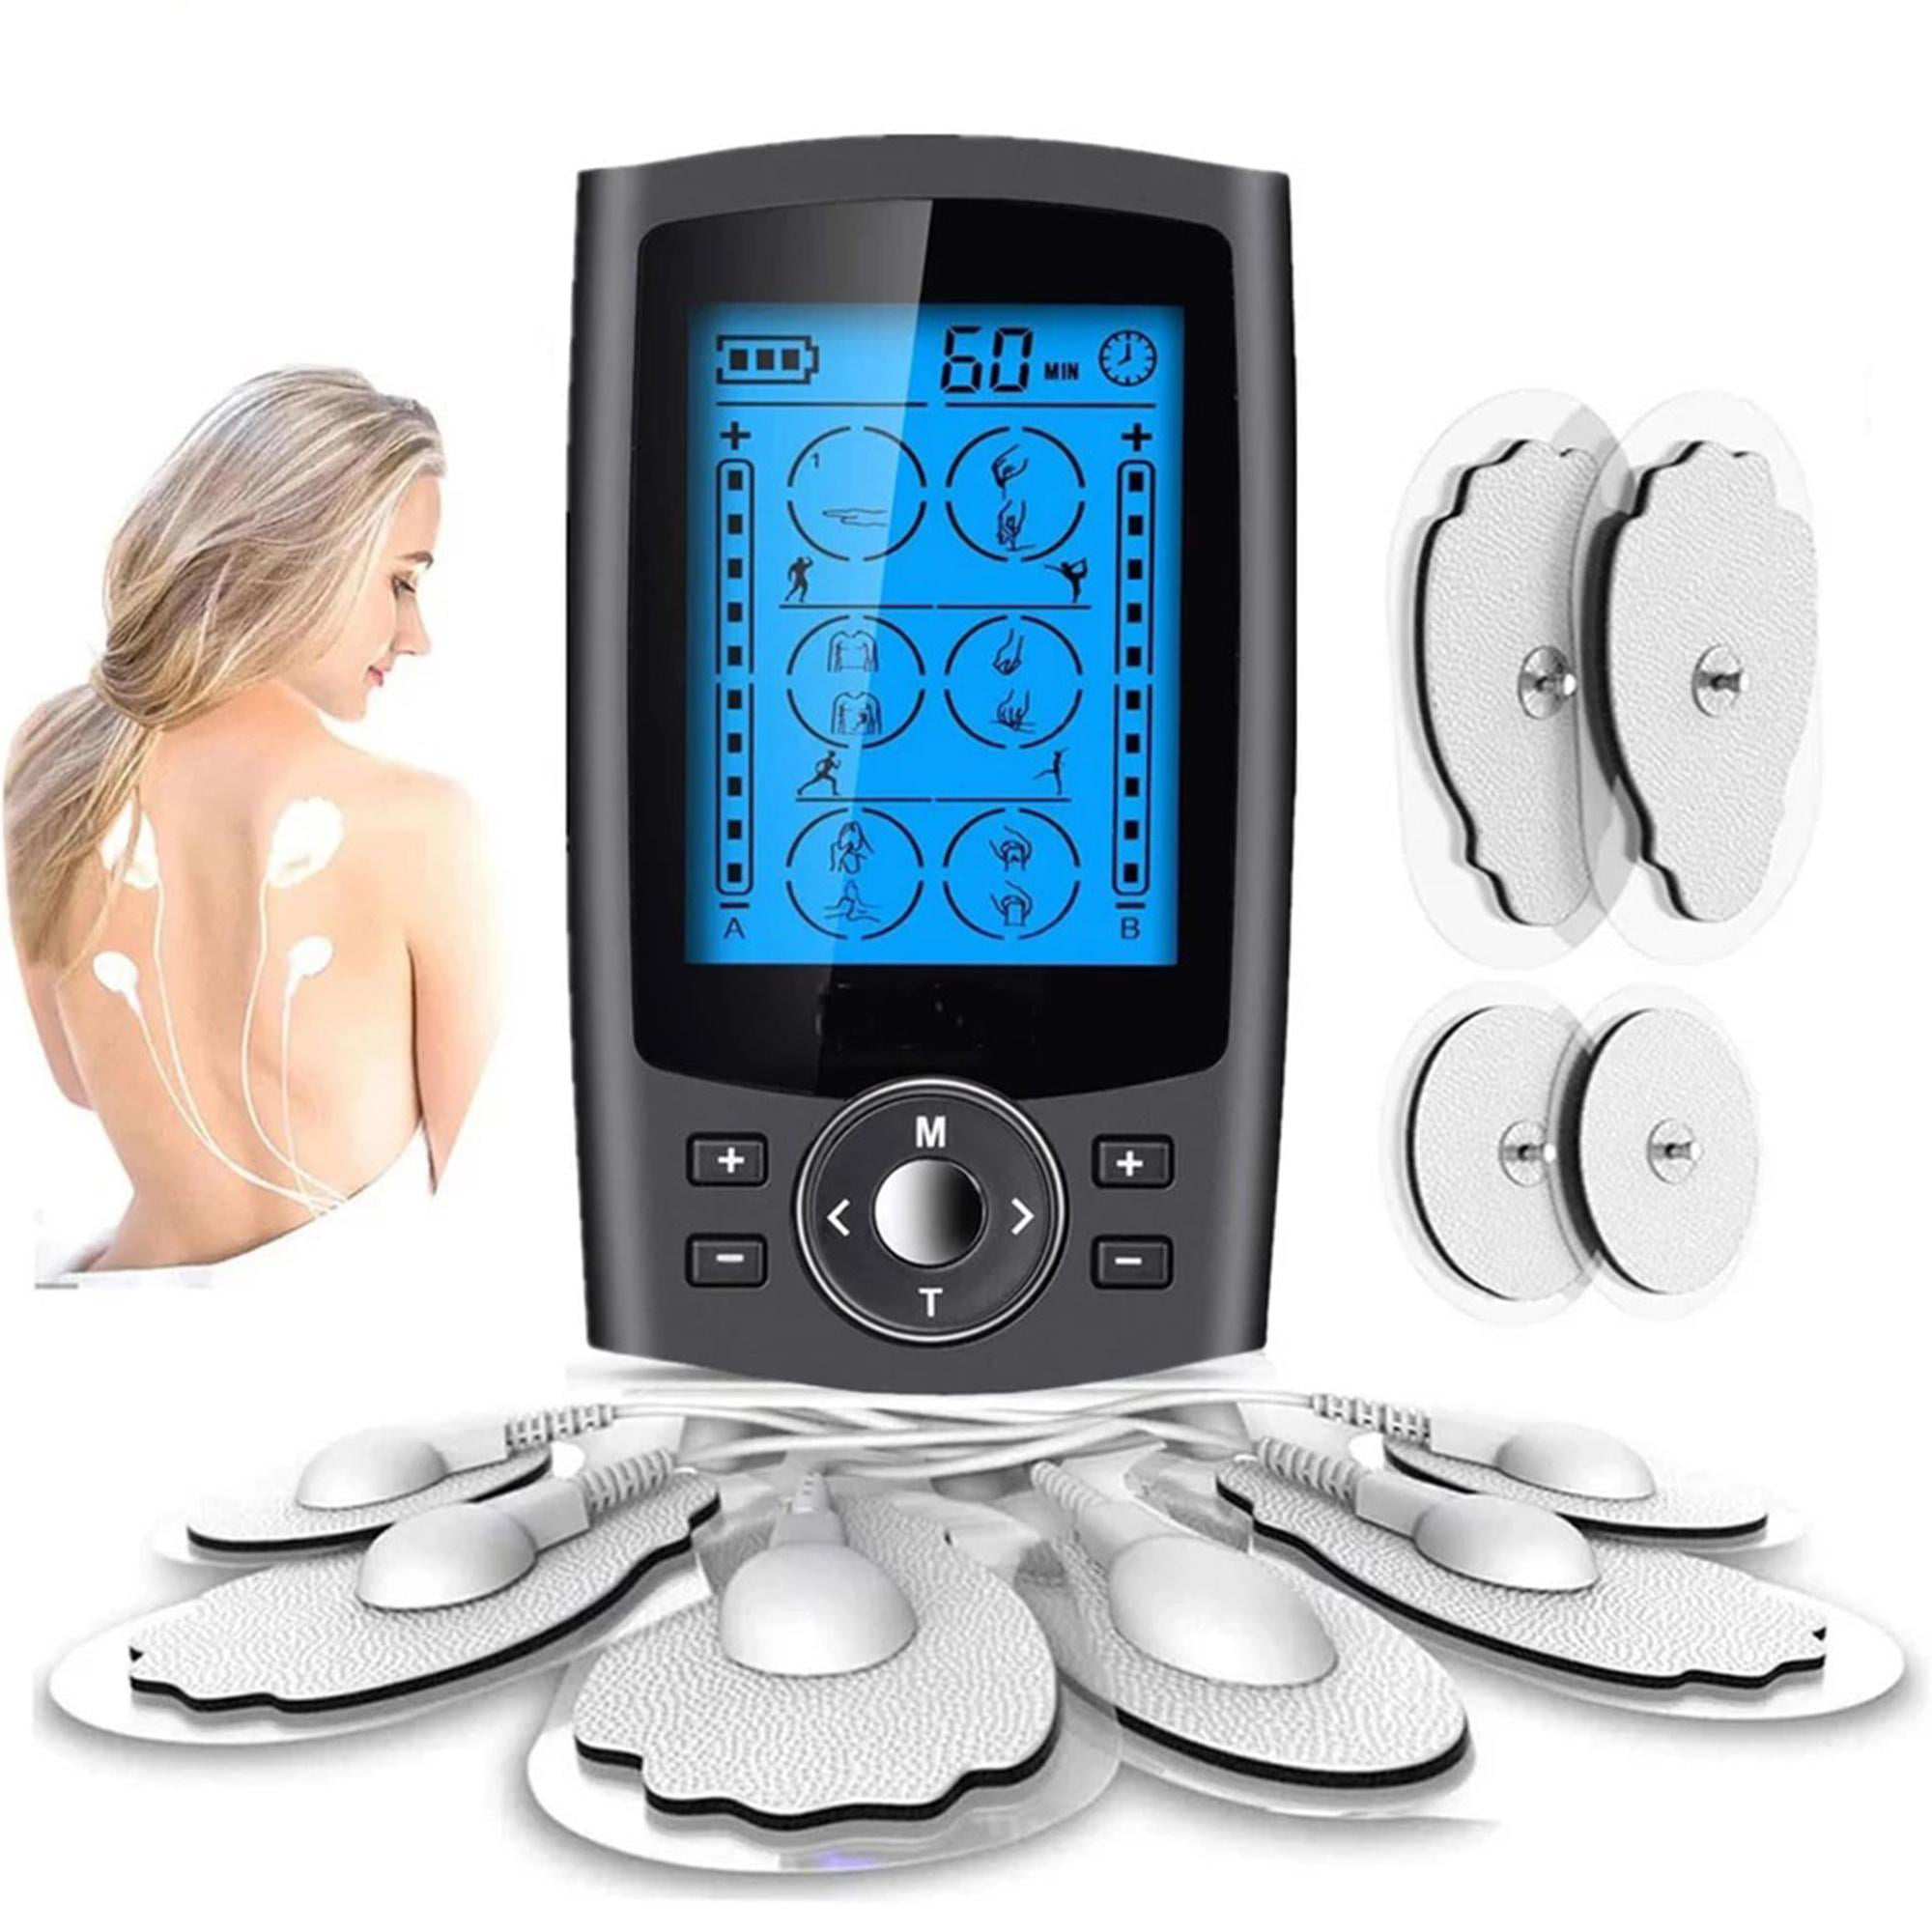 Muscle Pain Relax Therapy Machine Body Massager Stimulator Pain Relief @1 